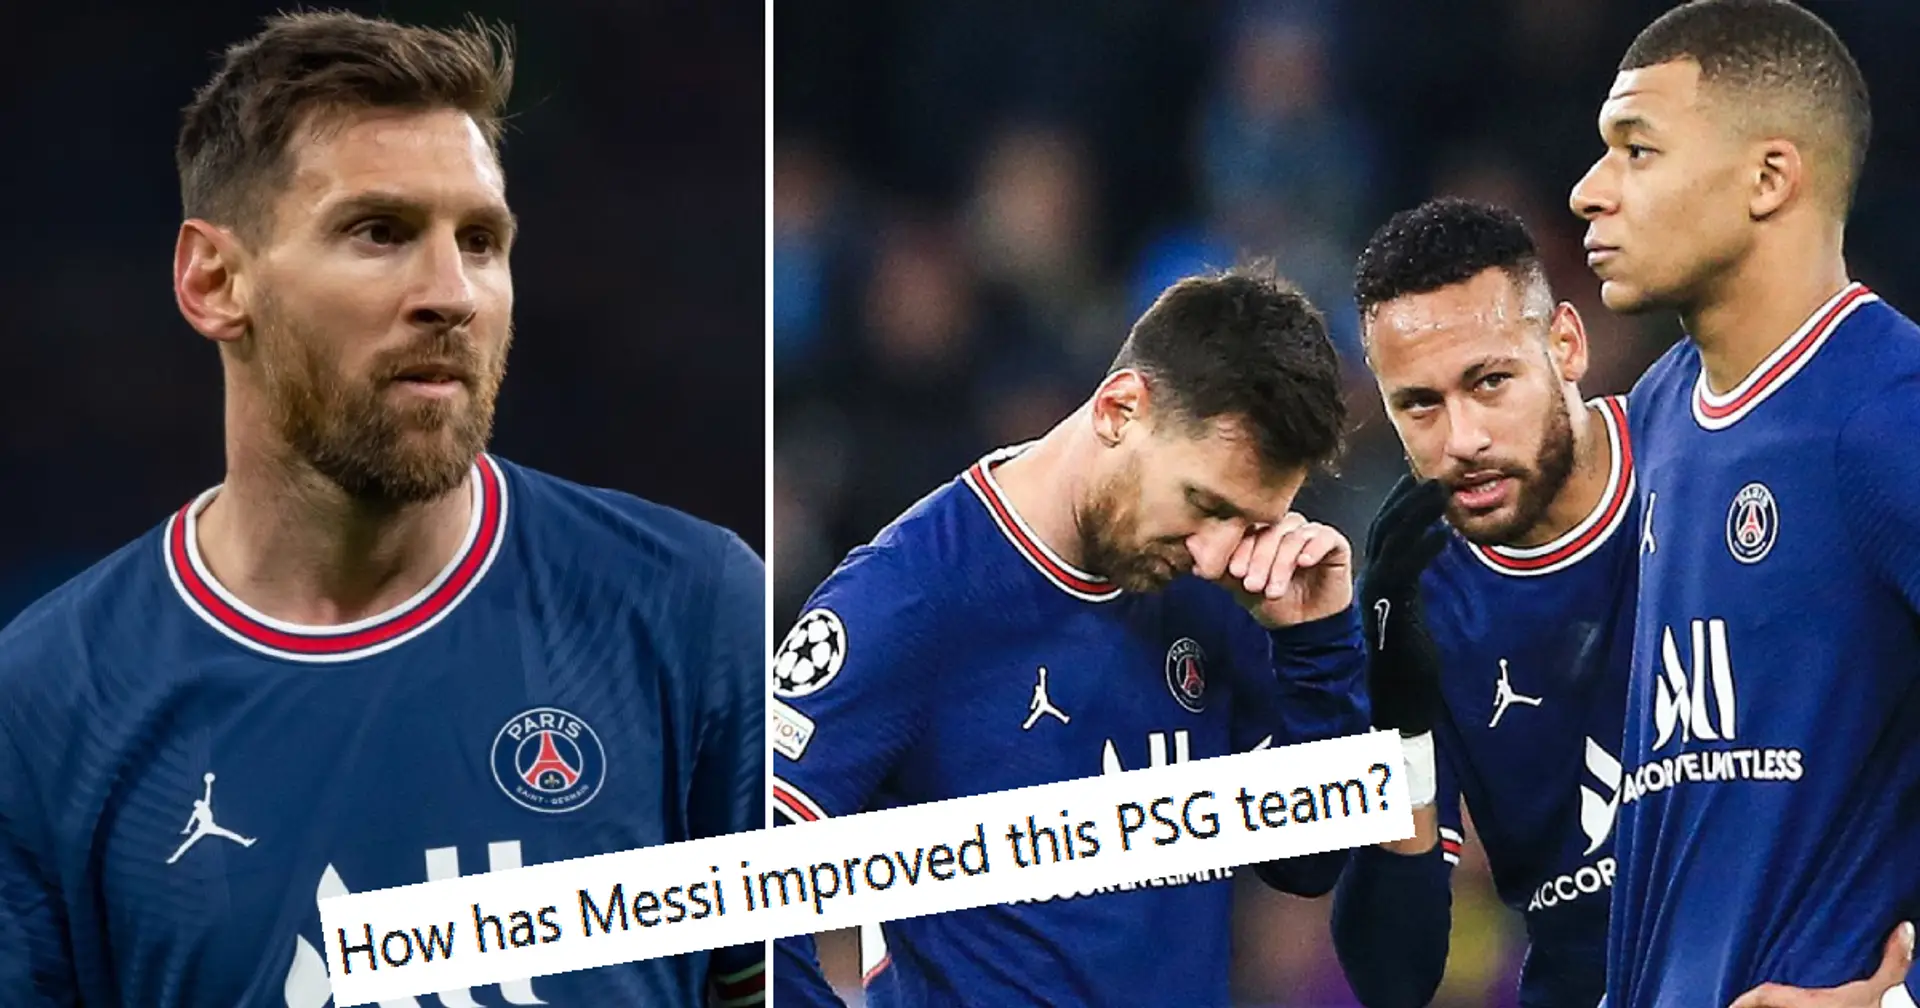 'Messi is the problem': Fans dig into Messi, mock PSG after defeat to Manchester City